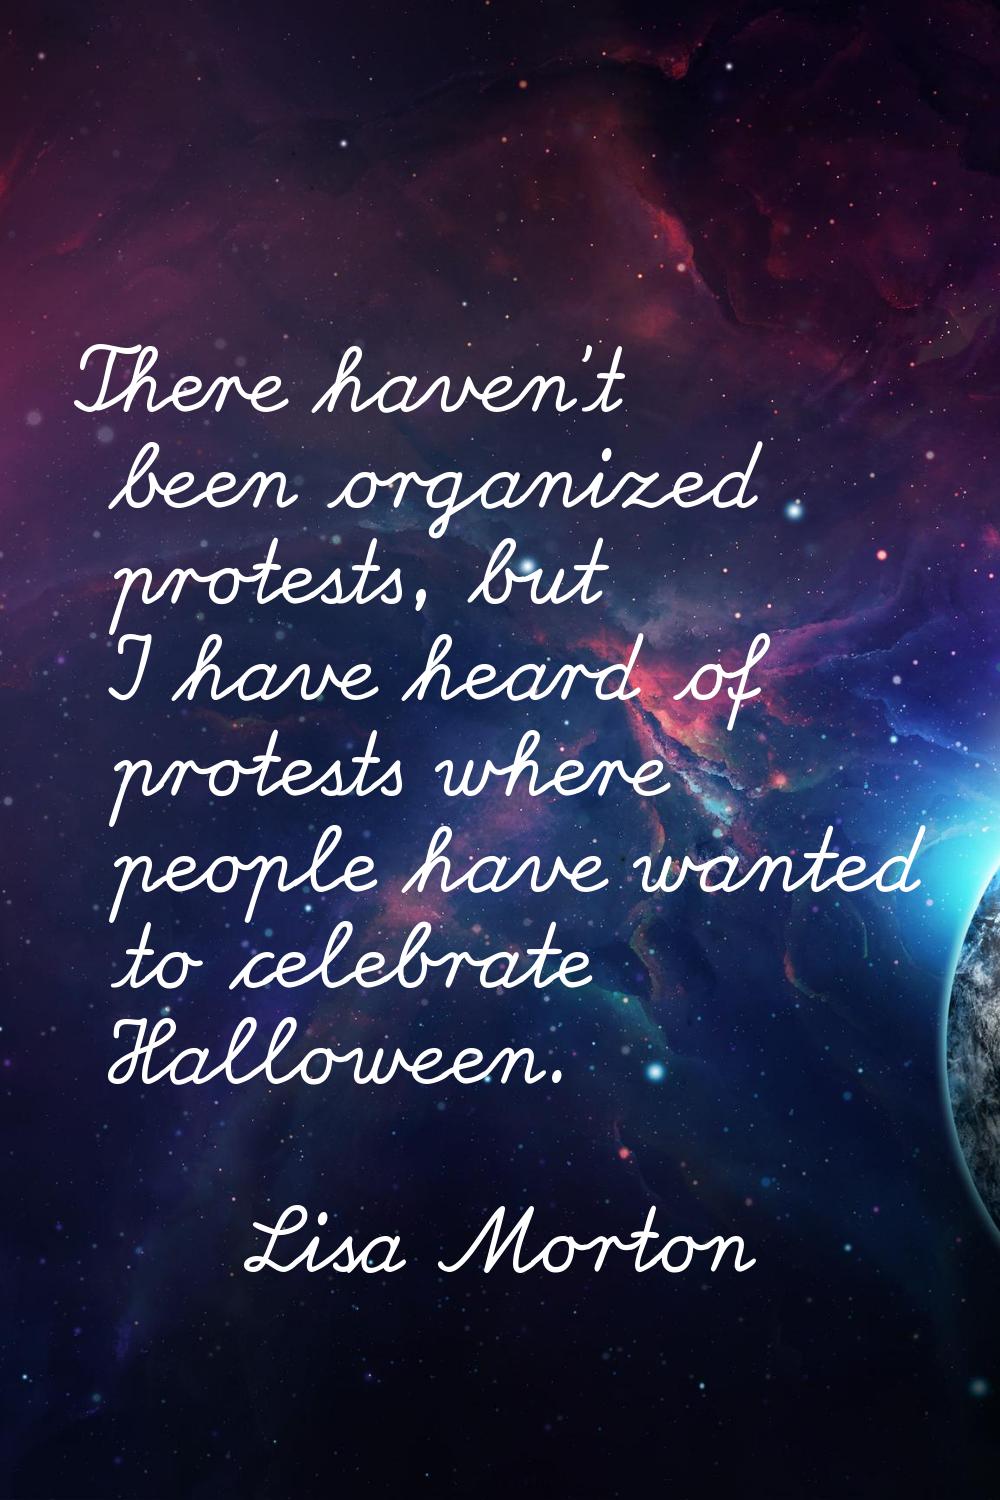 There haven't been organized protests, but I have heard of protests where people have wanted to cel